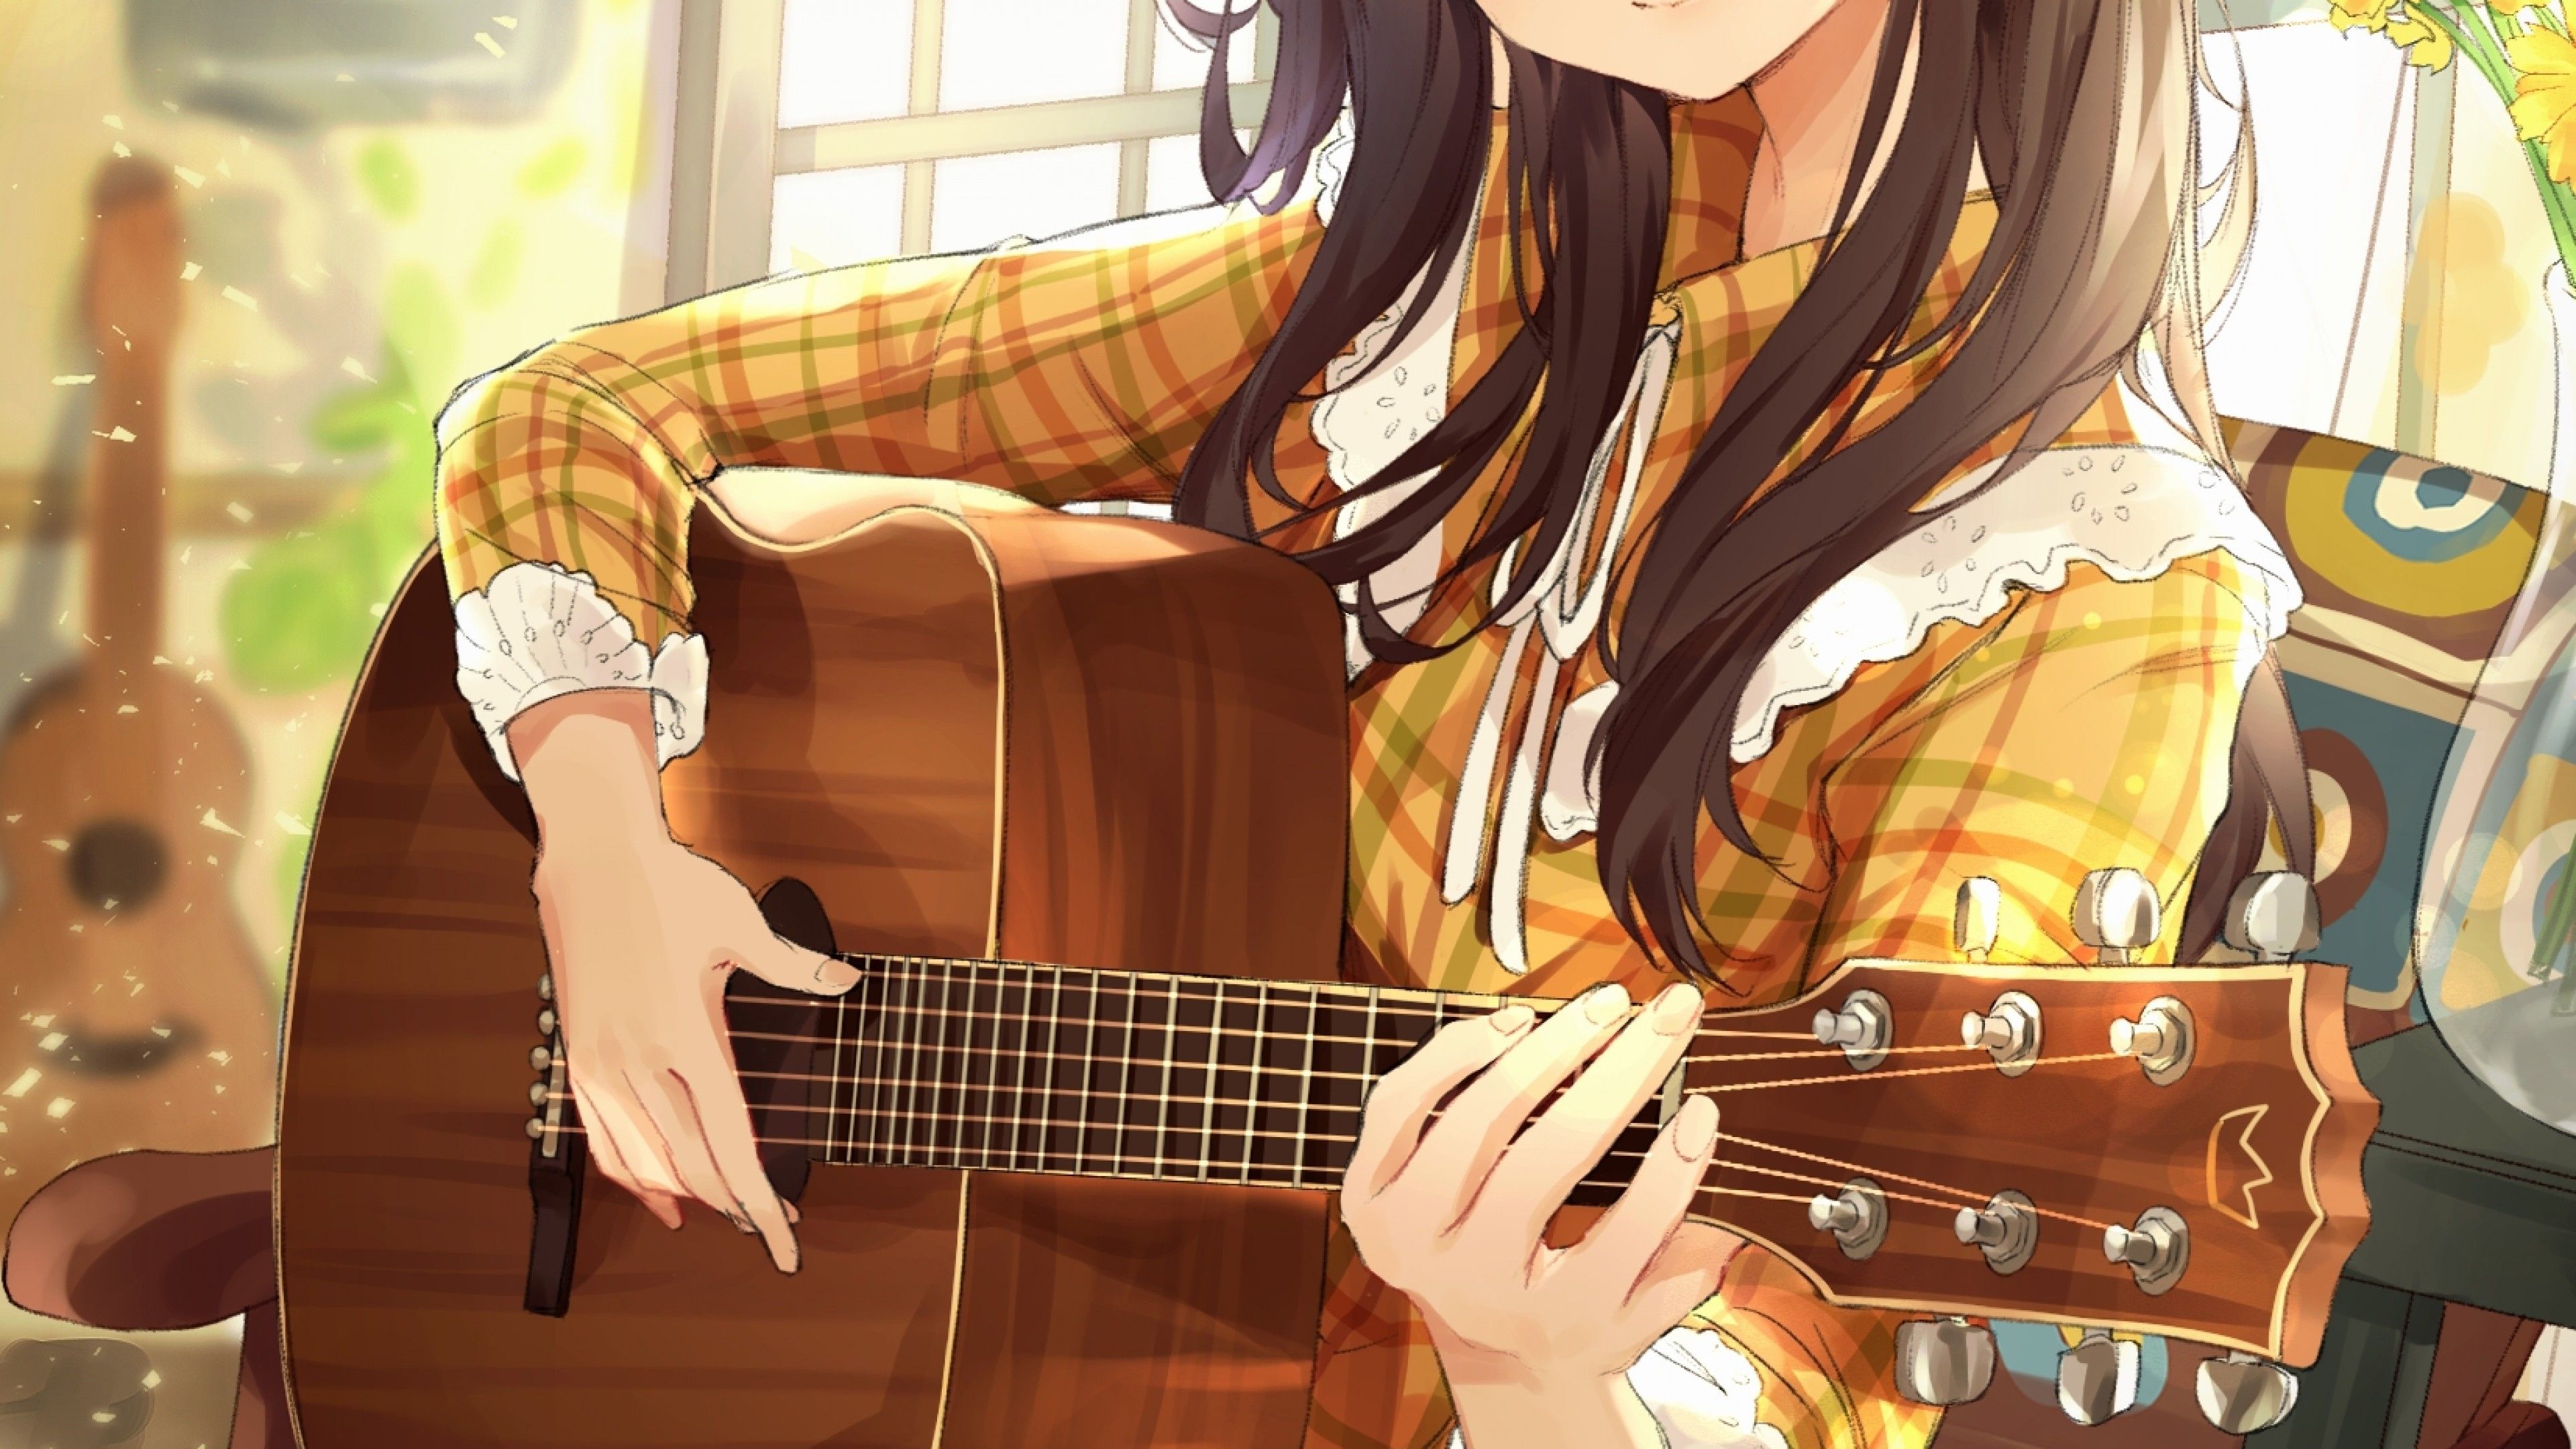 Download 3840x2160 Anime Girl, Playing Guitar, Instrument, Music